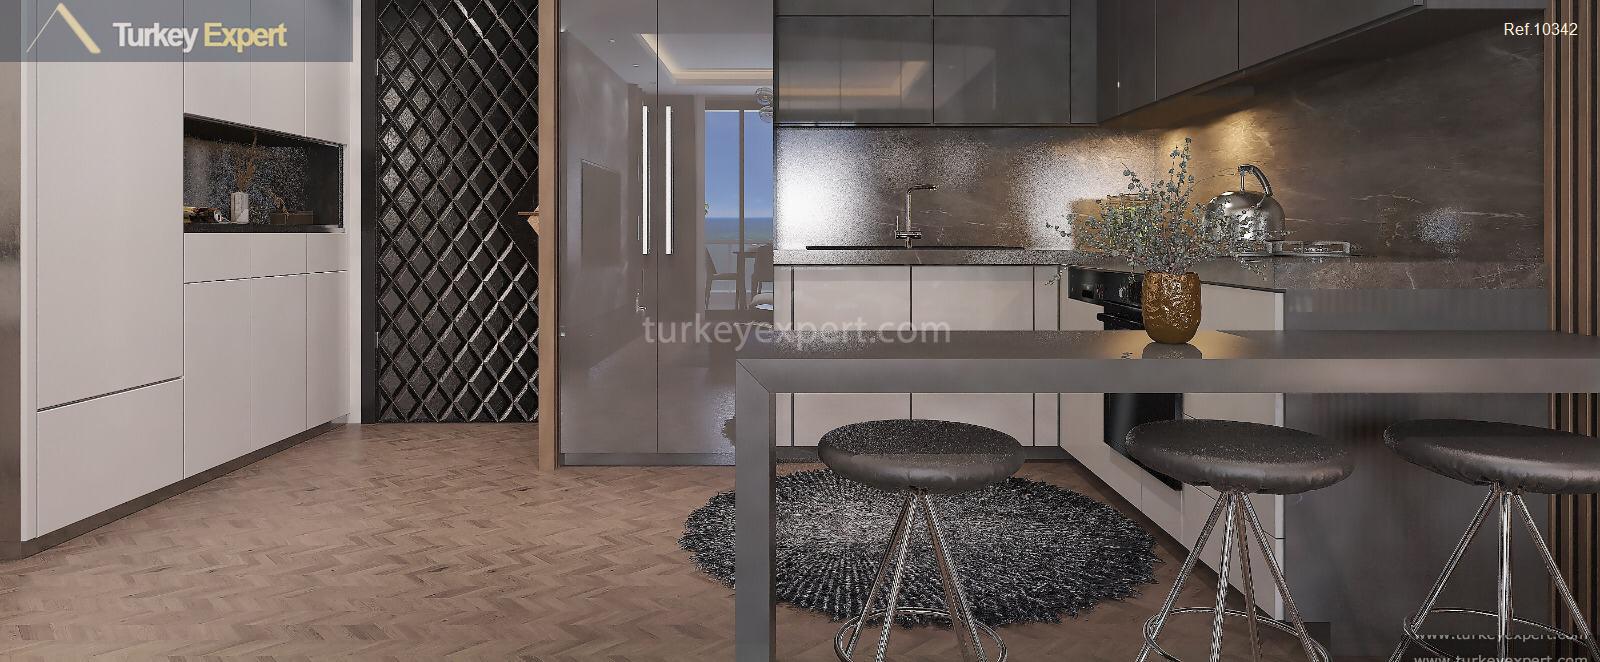 beautiful apartments with modern features near the sea in mersin22.